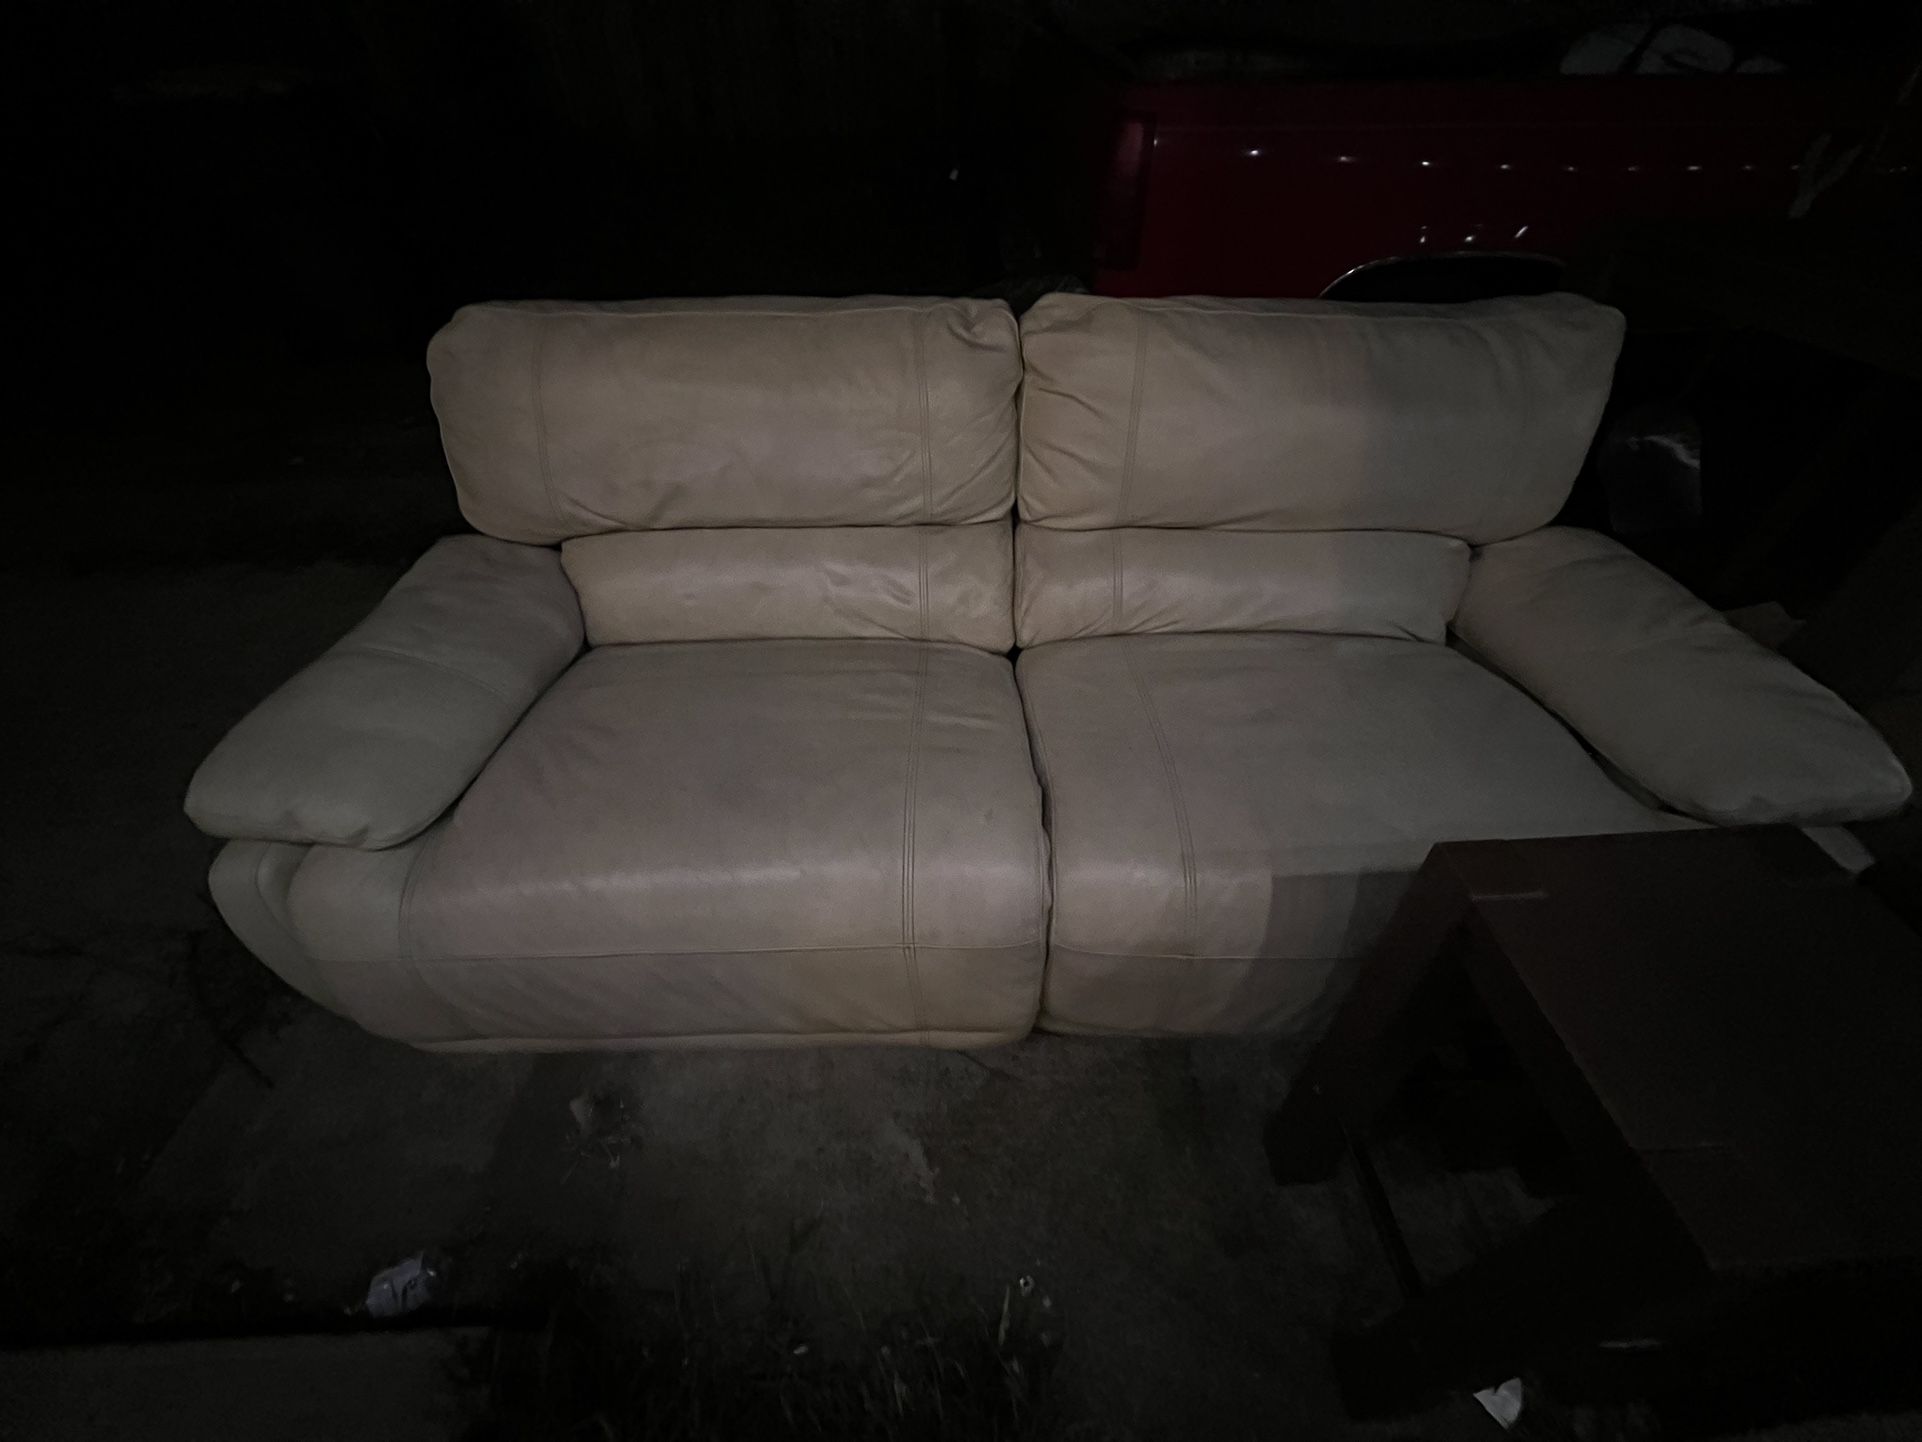 Power Reclining Couch 